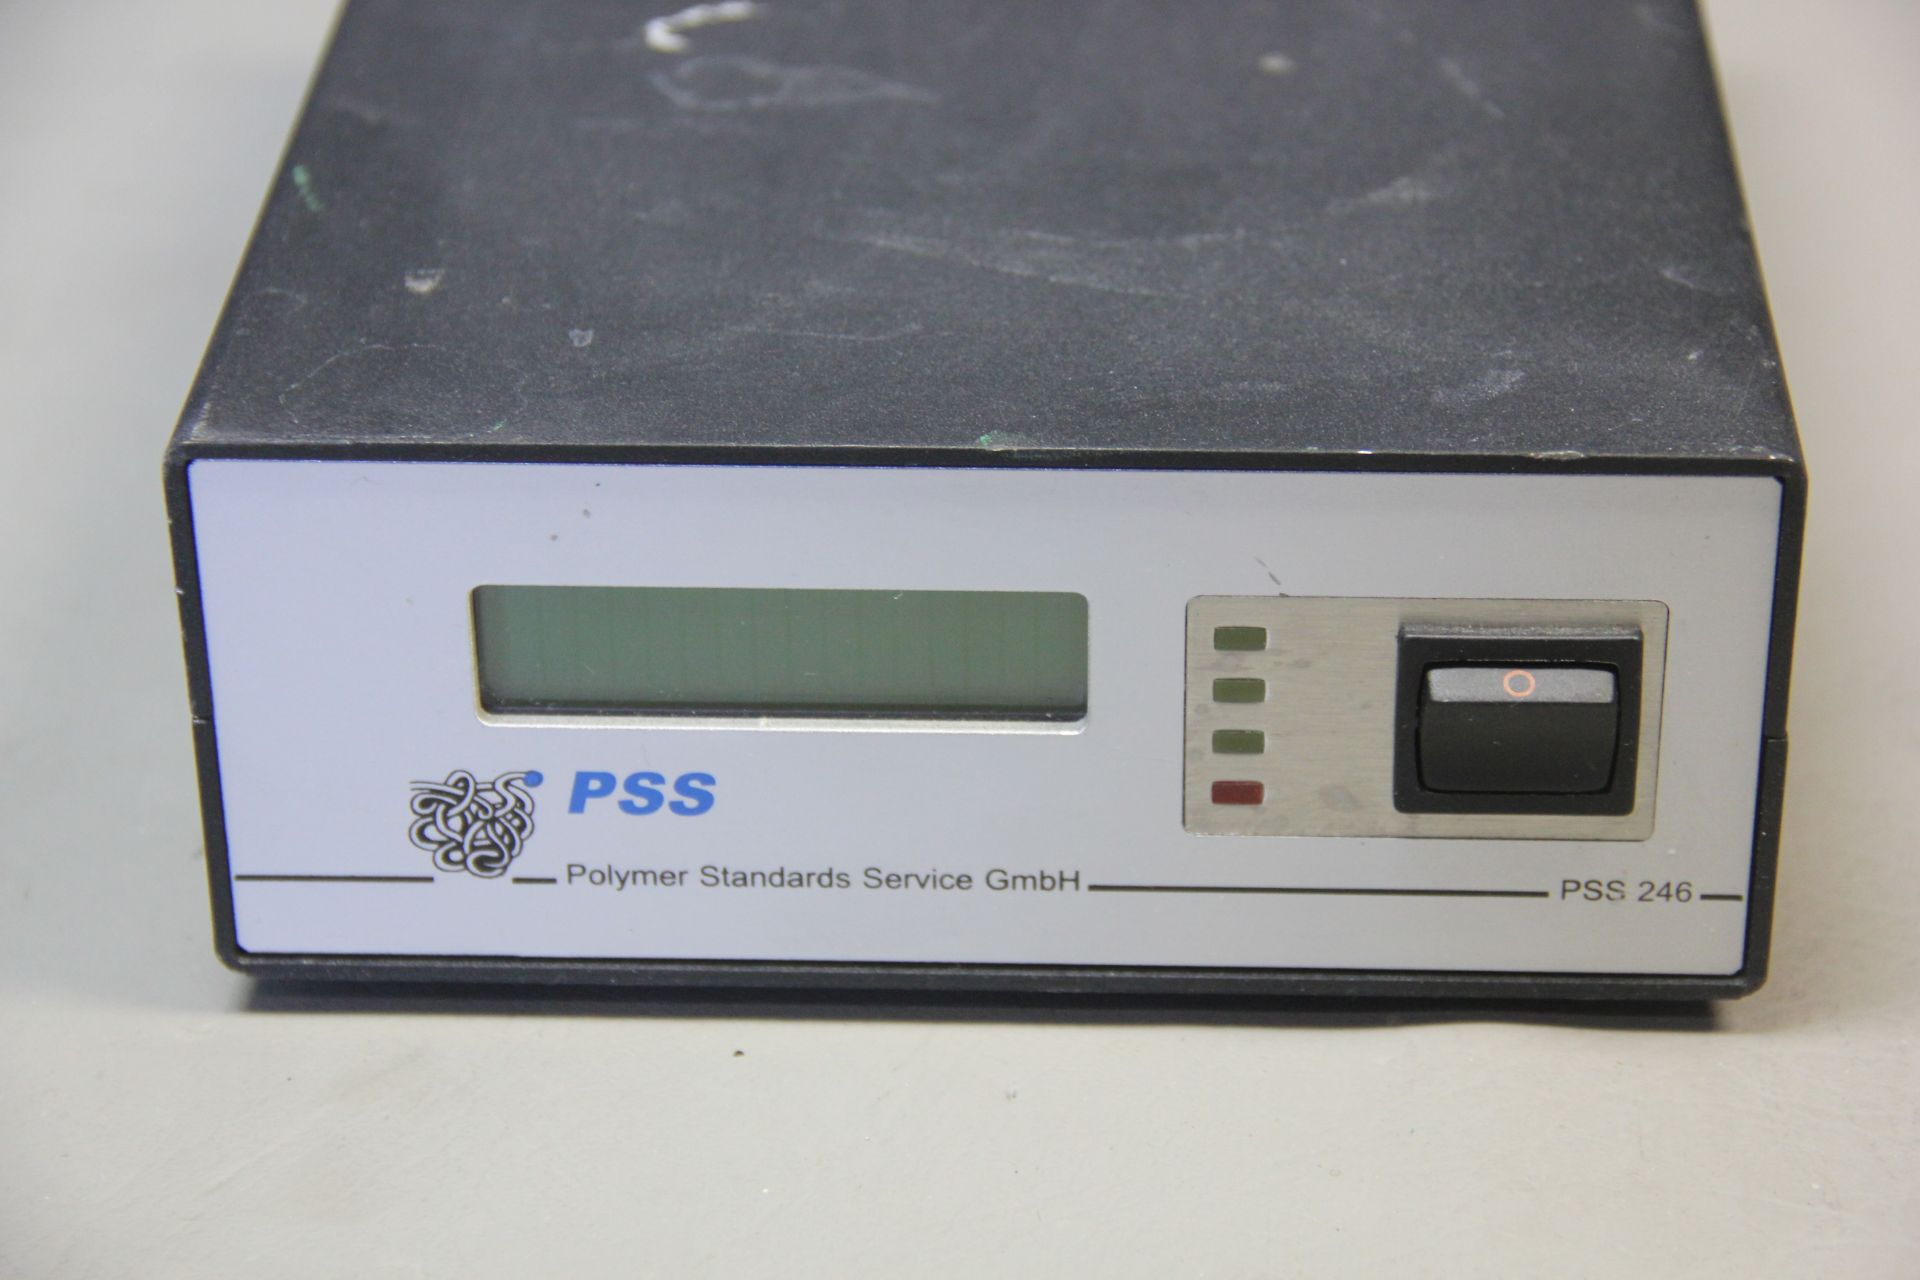 PSS/AGILENT POLYMER STANDARDS SERVICE CONTROL UNIT - Image 2 of 7